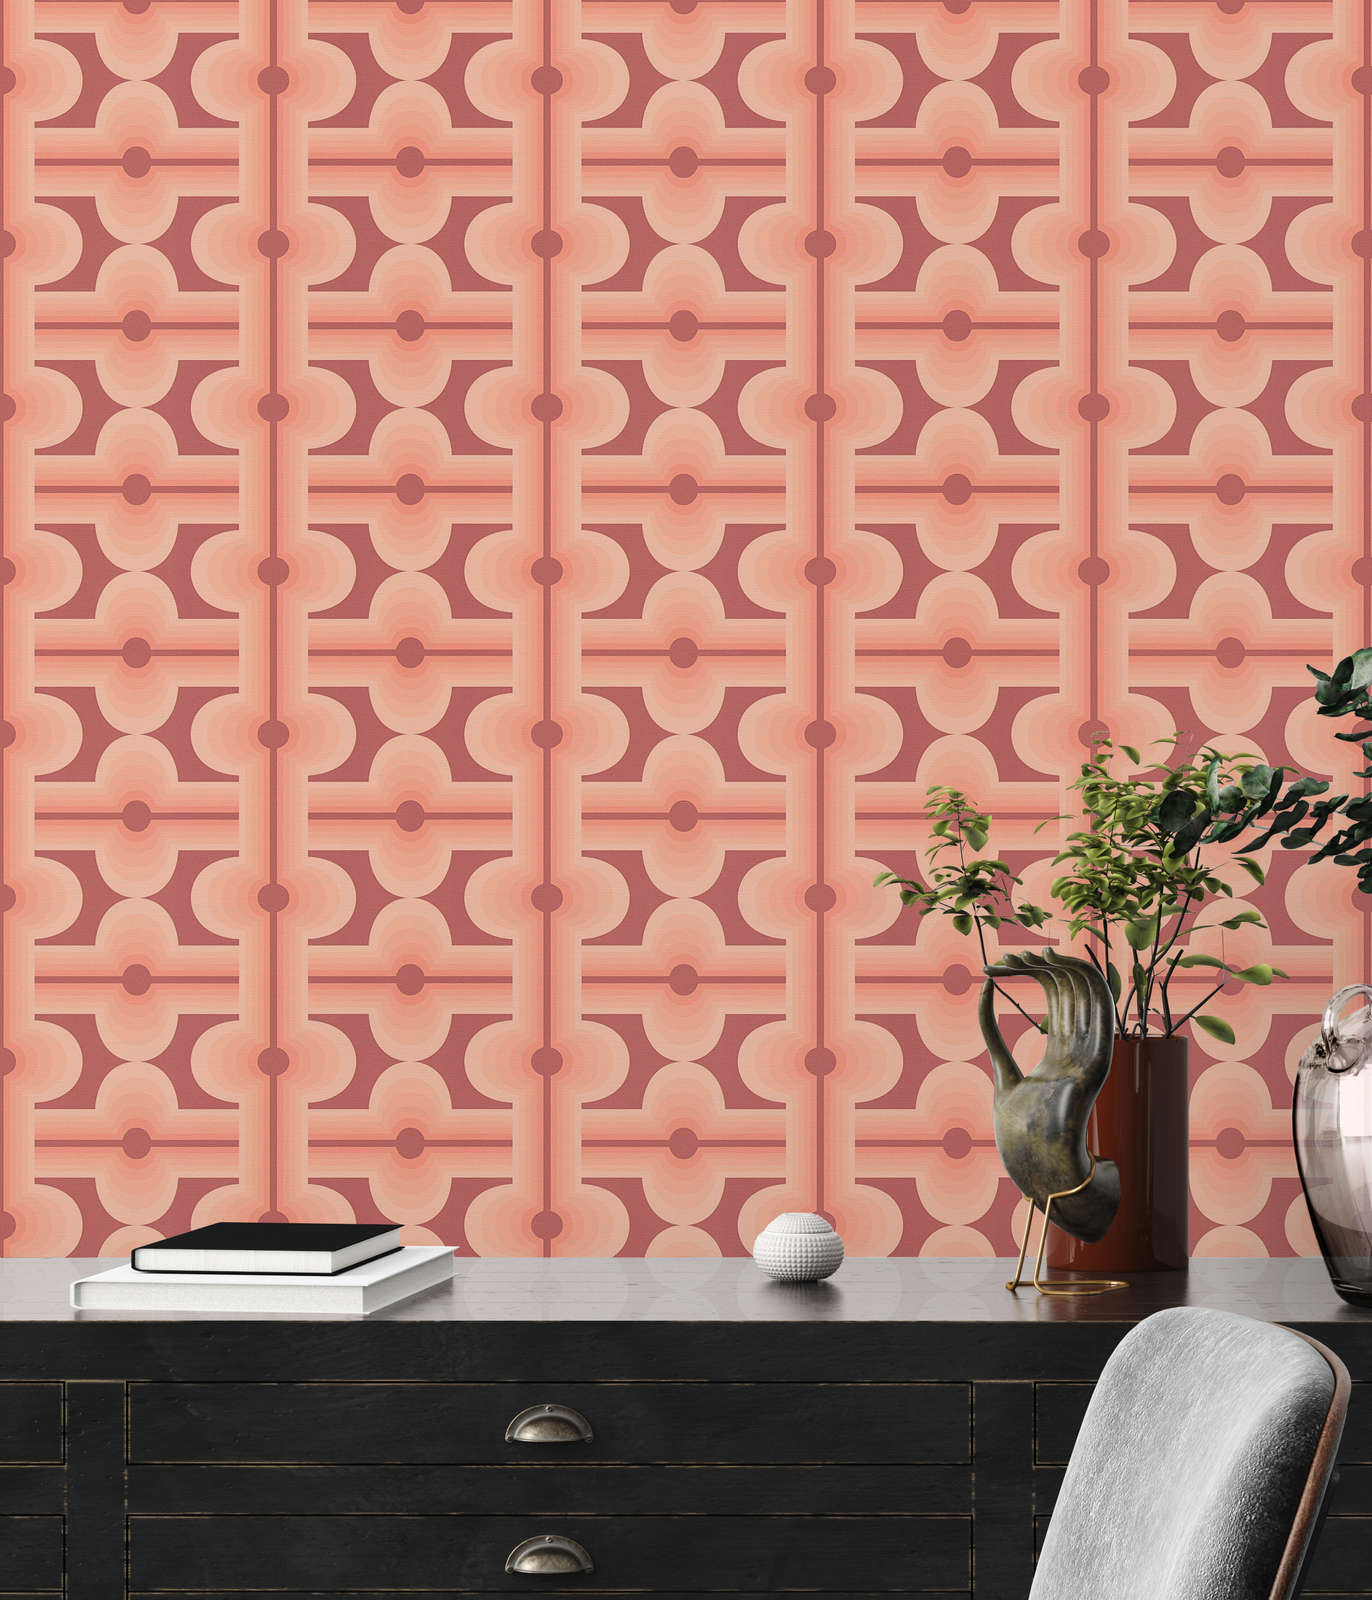             Abstract patterned non-woven wallpaper in retro style - red, orange
        